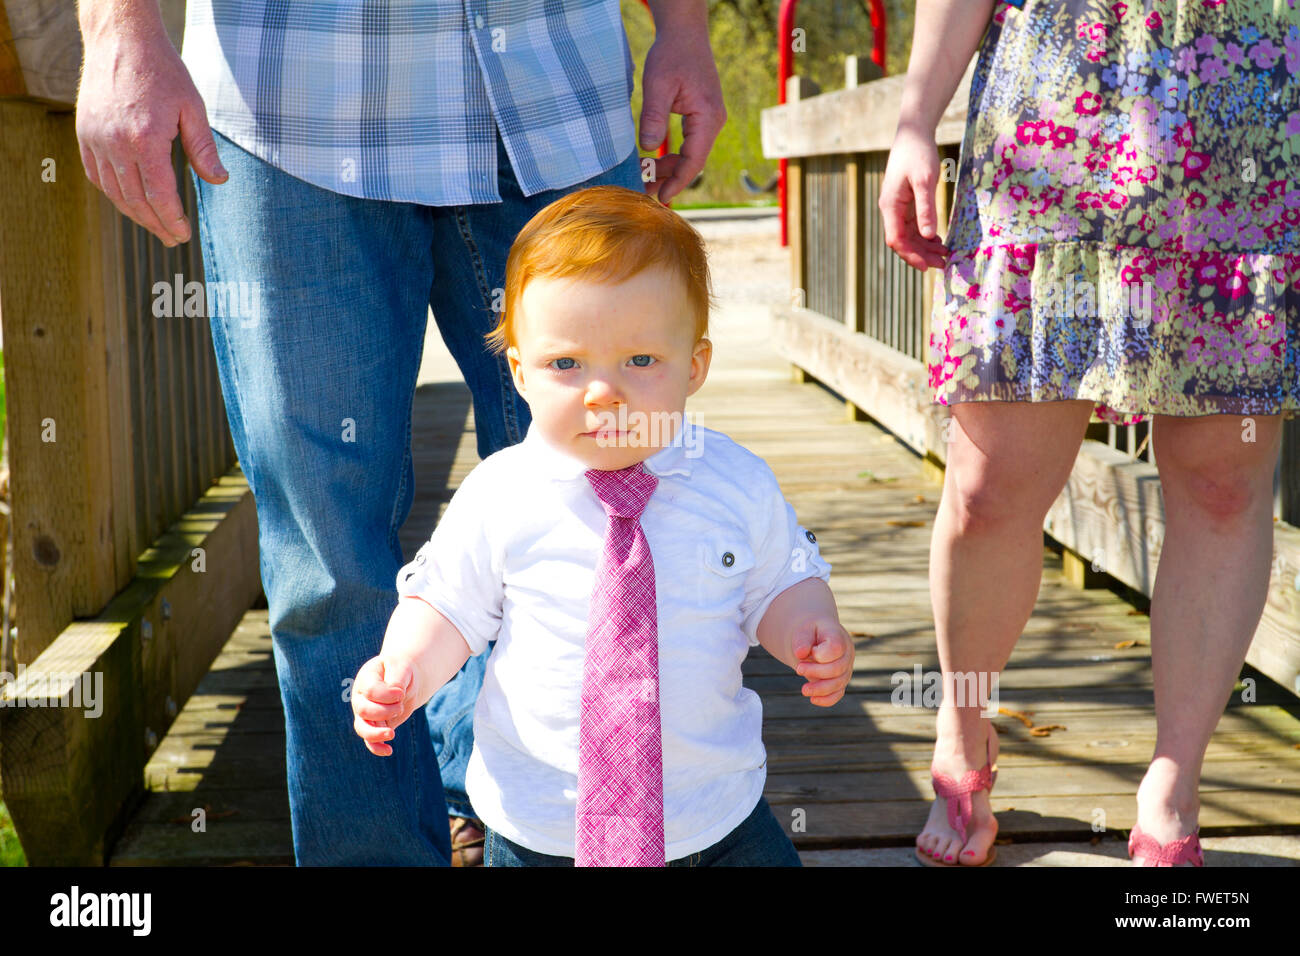 A baby wearing a red or pink necktie walks across a bridge with his parents behind him. Stock Photo